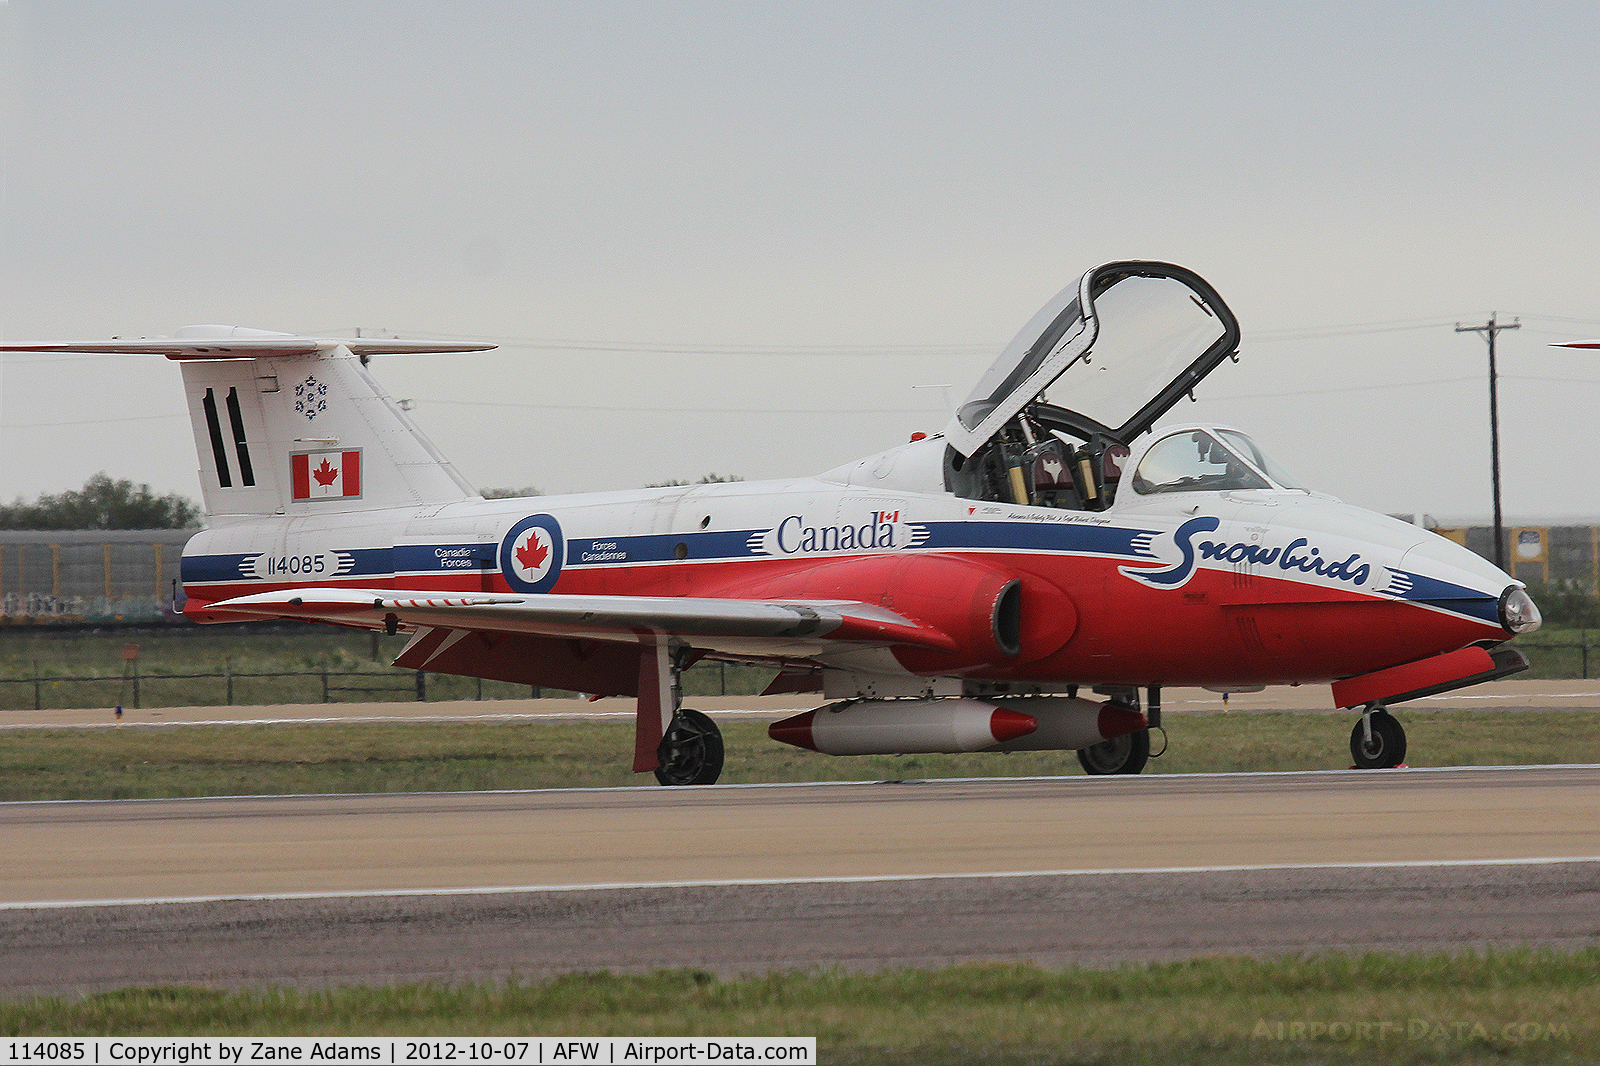 114085, Canadair CT-114 Tutor C/N 1085, At the 2012 Alliance Airshow - Fort Worth, TX